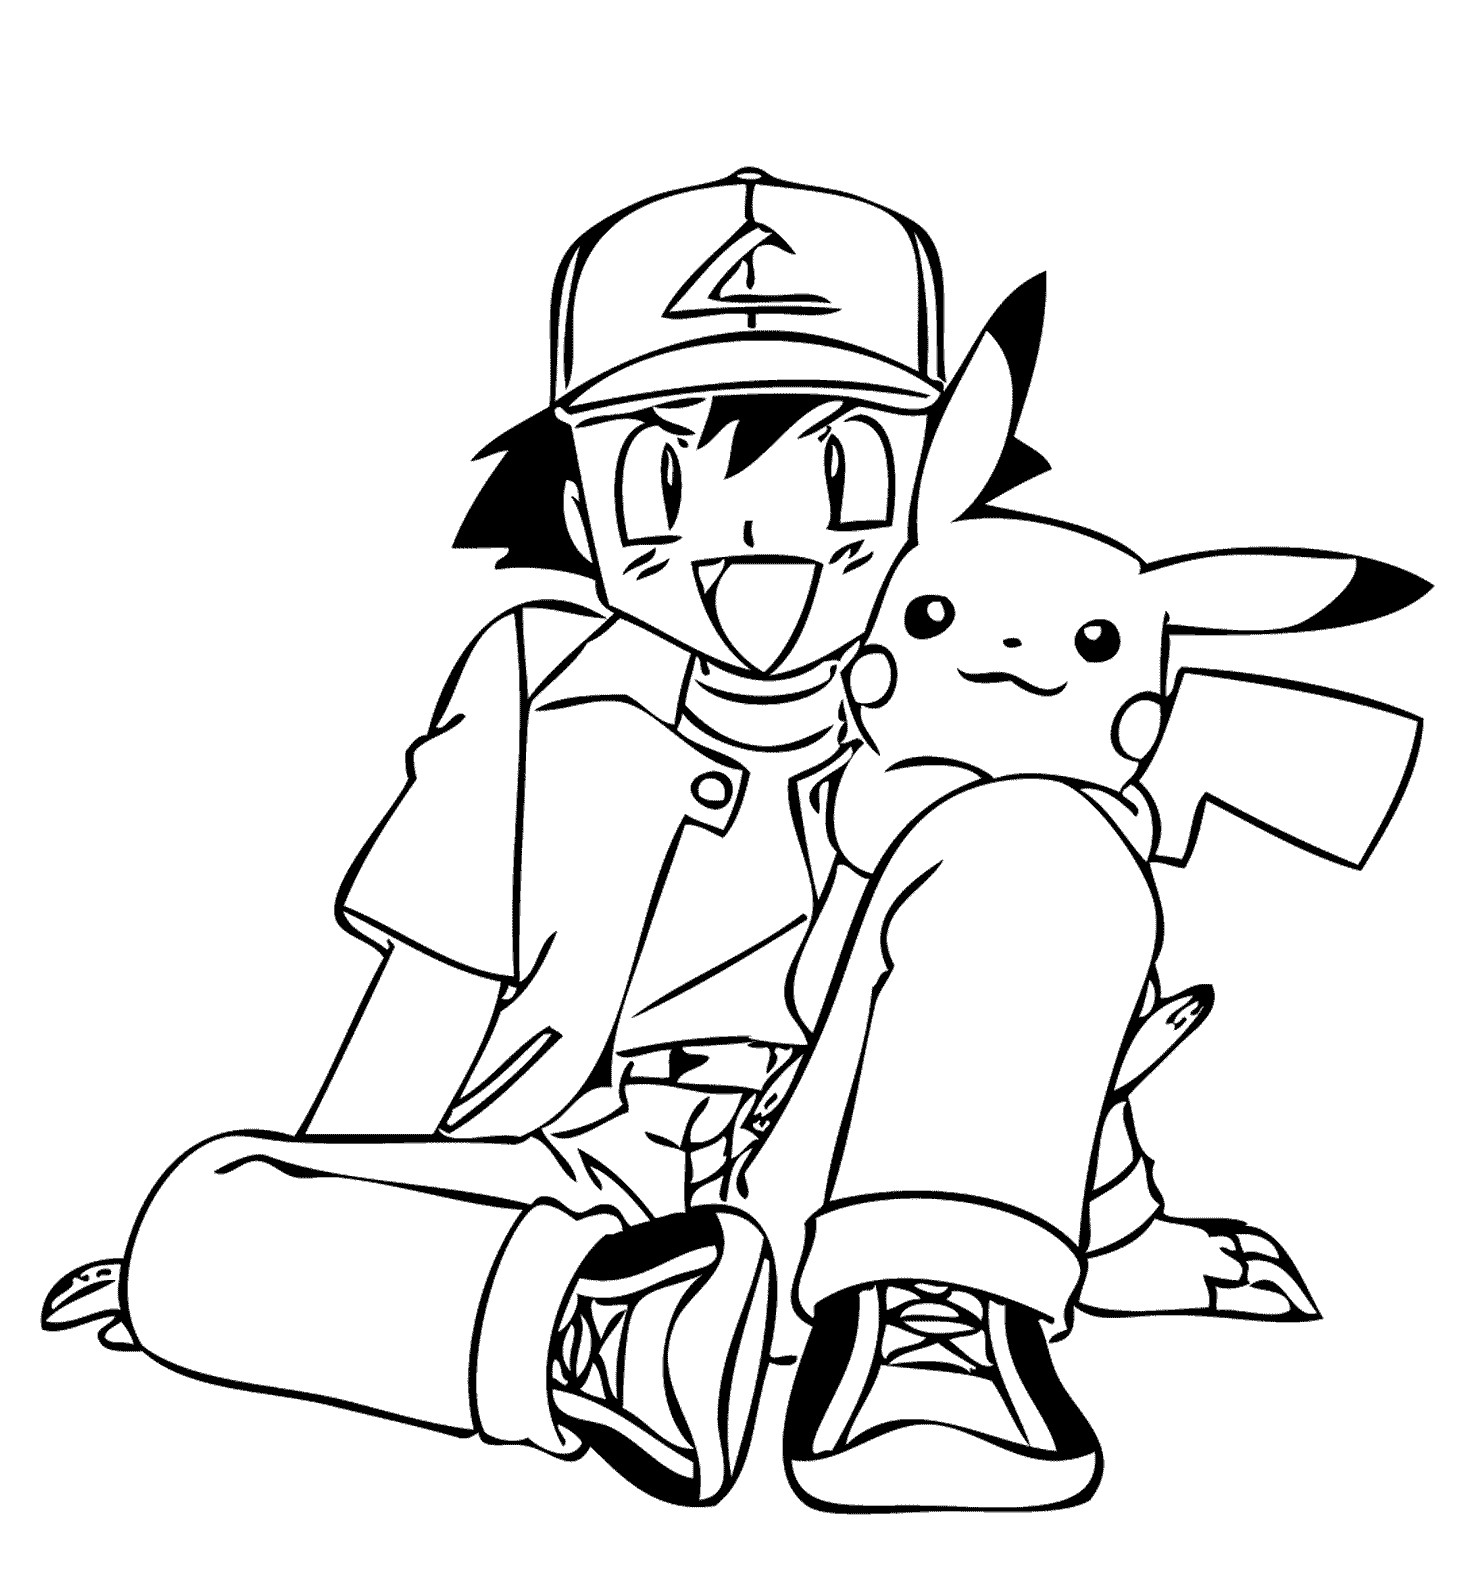 Pokemon Coloring Pages For Boys
 Friends from Pokemon anime coloring pages for kids